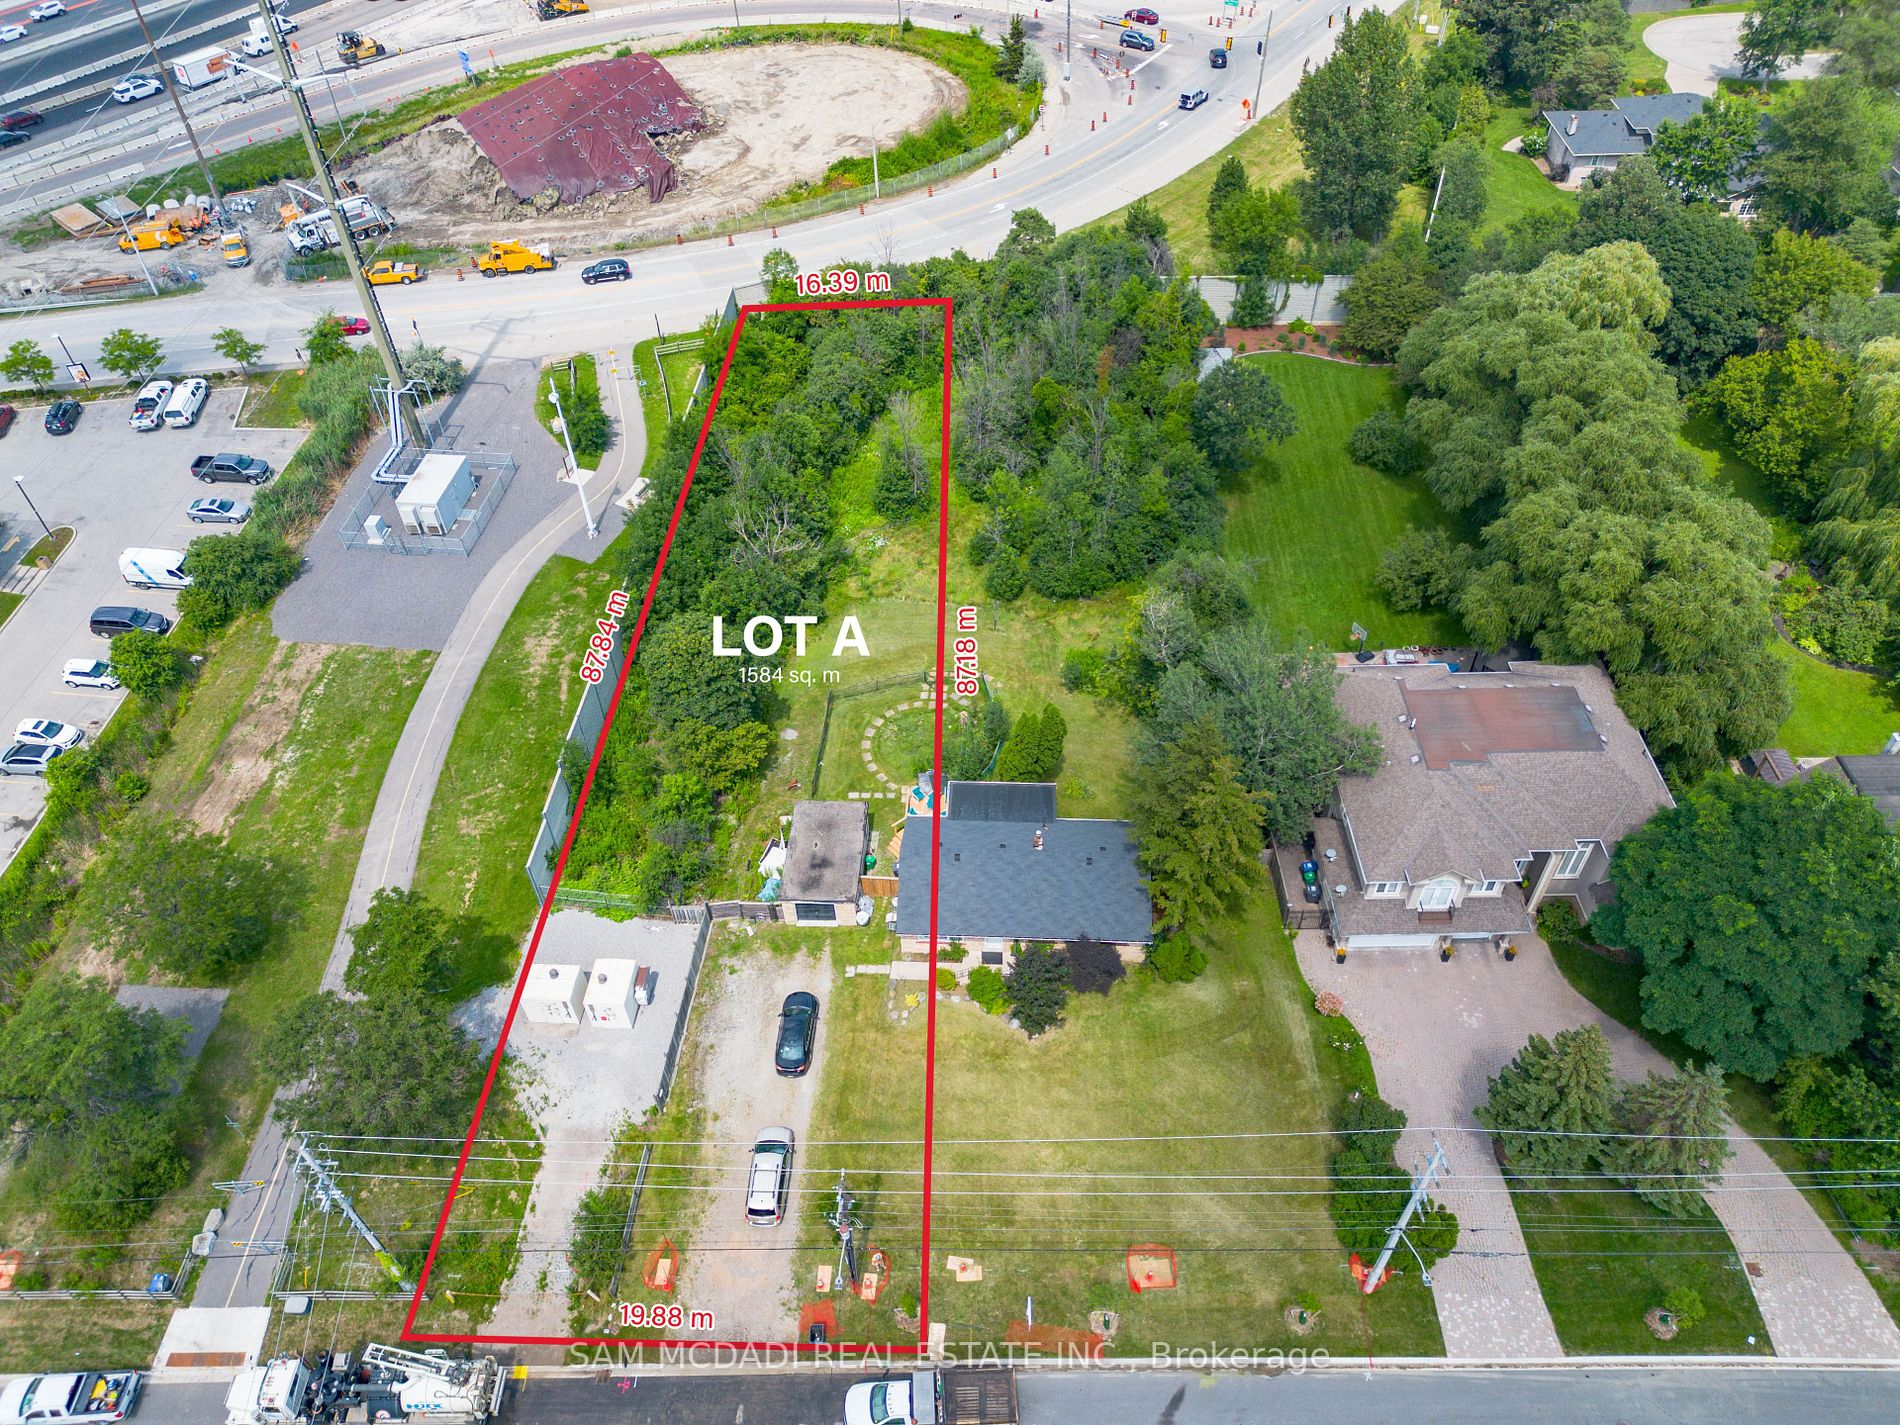 Lot A - 1561 Indian Grve - Featured Listing in Mississauga by Sam McDadi - 01